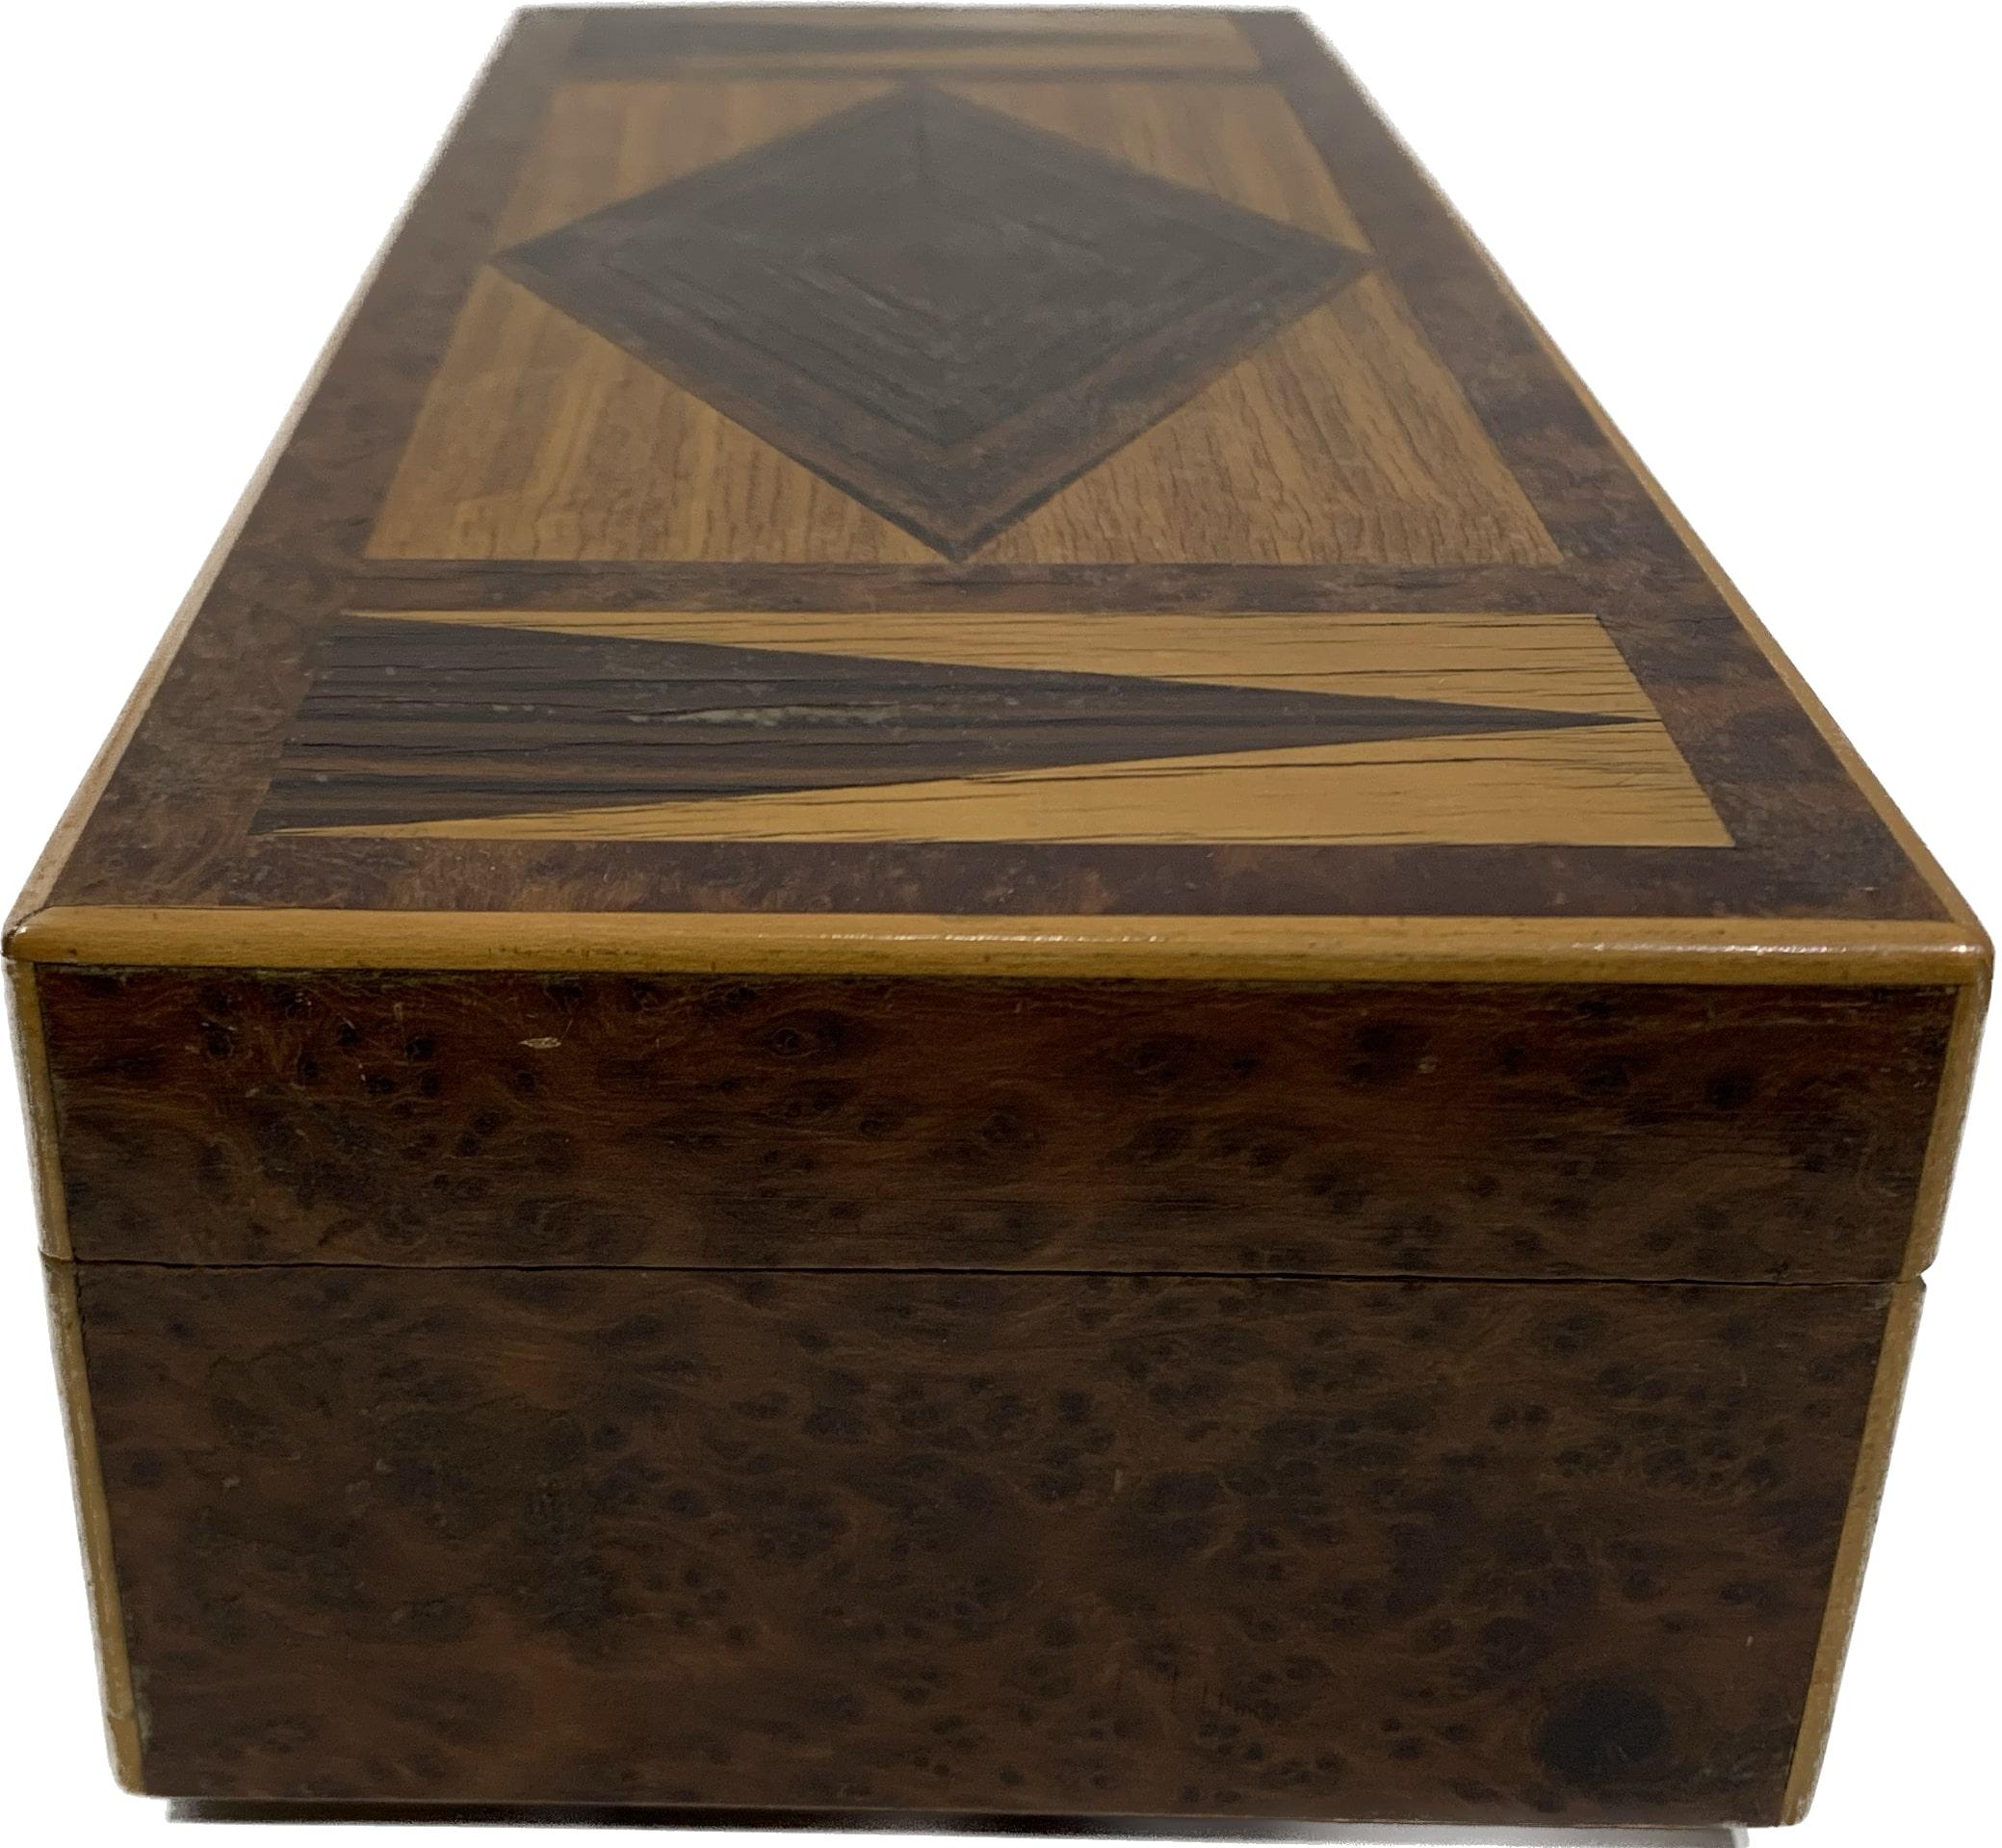 Art Déco Decorative Wooden Box In Good Condition For Sale In Beirut, LB